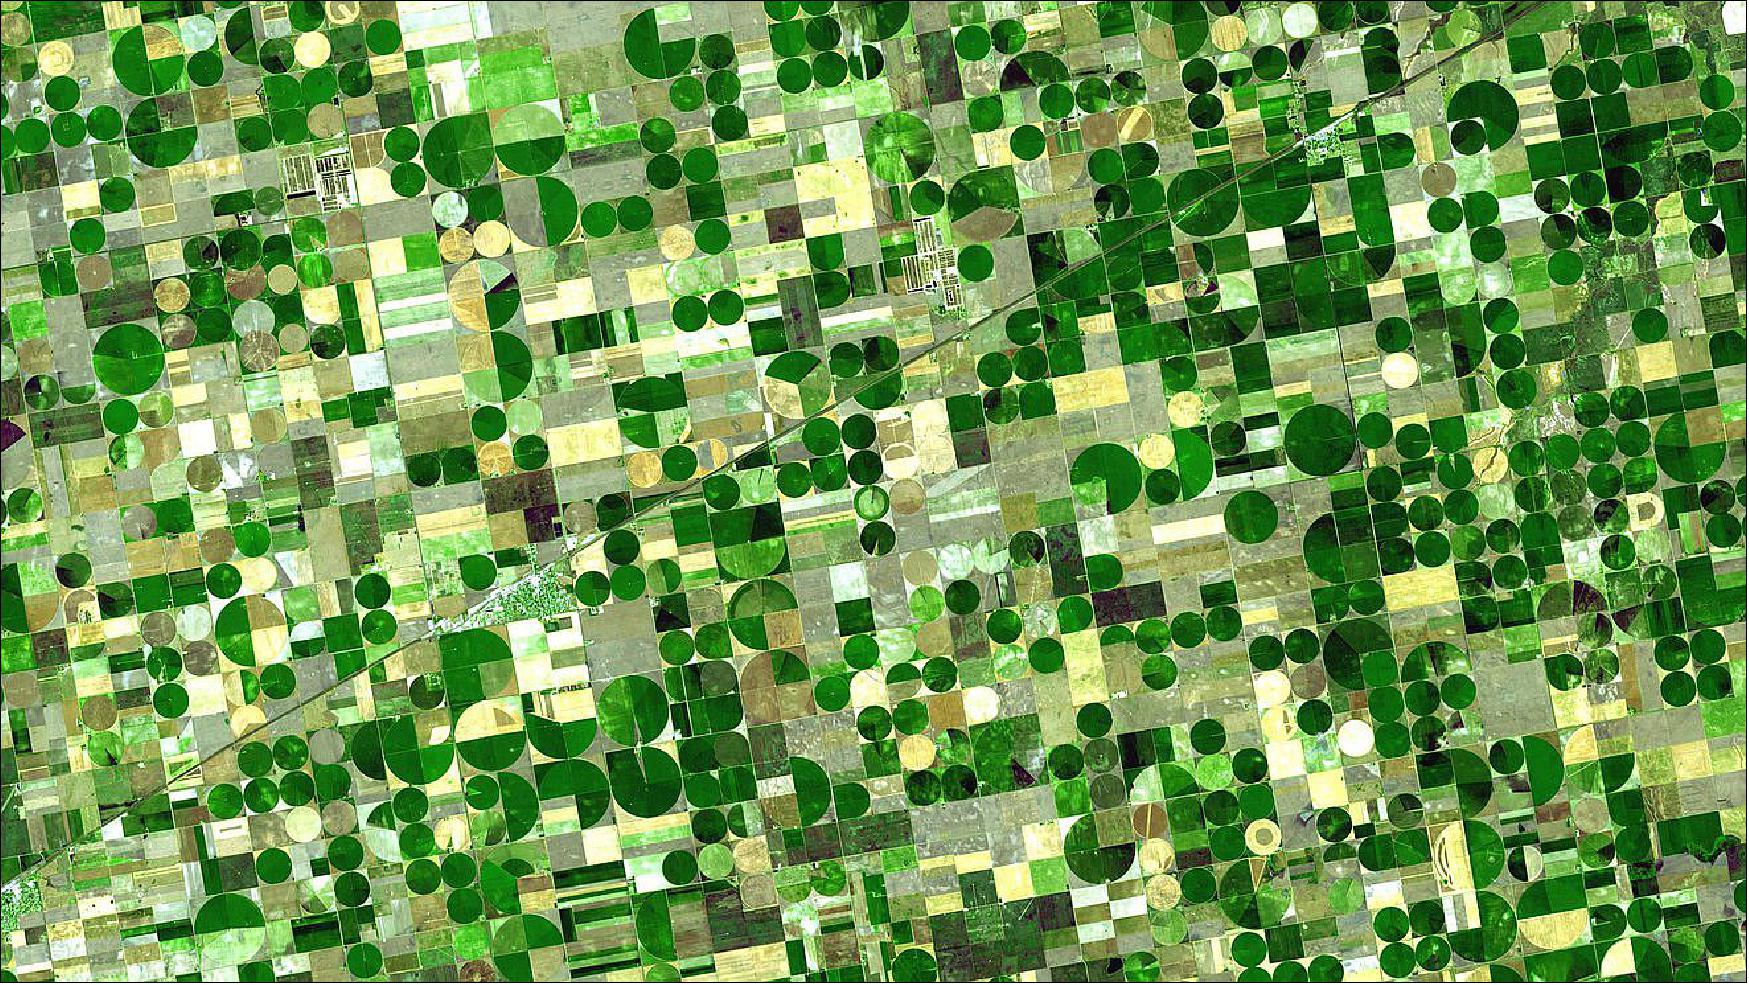 Figure 17: People looking to plant crops now have a new planning tool in their toolbox thanks to soil moisture data collected by NASA's Soil Moisture Active Passive (SMAP) mission (image credit: NASA/GSFC/METI/ERSDAC/JAROS, and U.S./Japan ASTER Science Team)